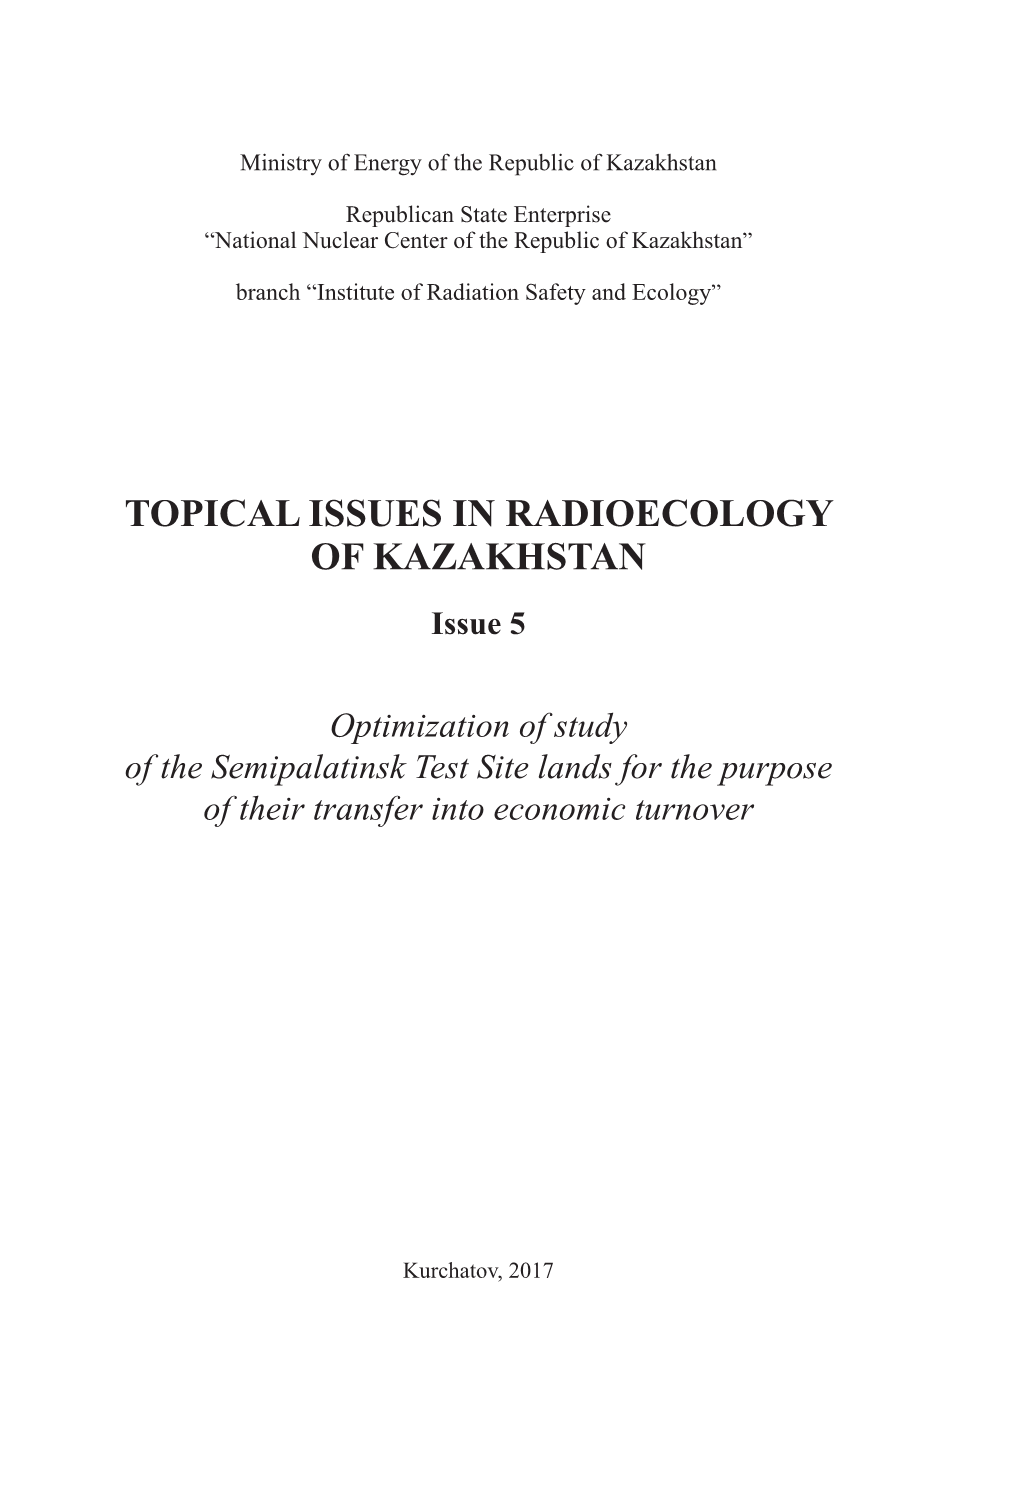 TOPICAL ISSUES in RADIOECOLOGY of KAZAKHSTAN Issue 5